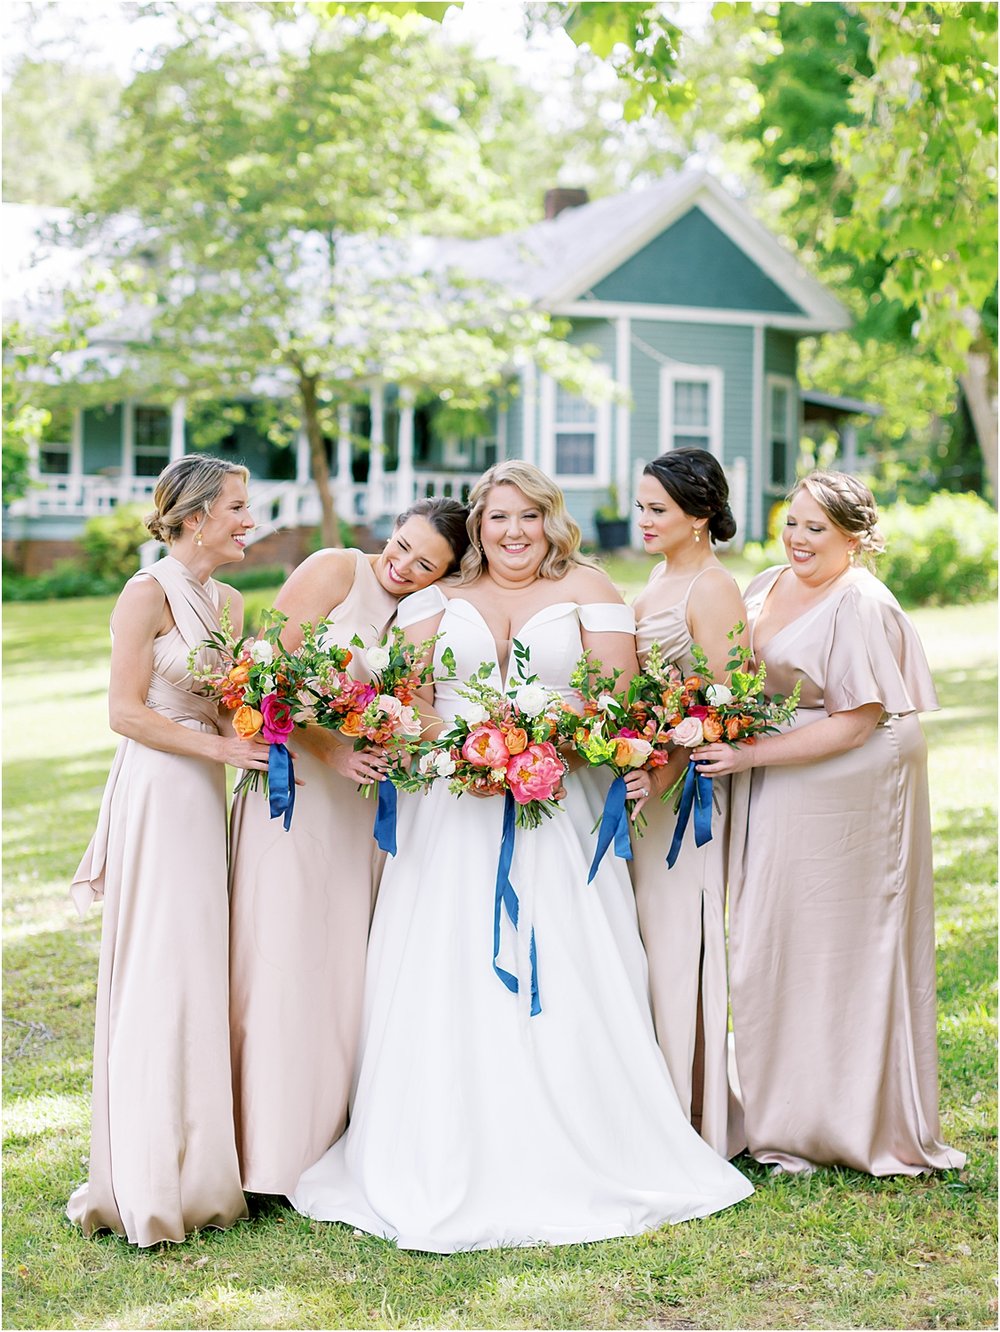 Just a bride and her besties - Southern summer wedding elegance